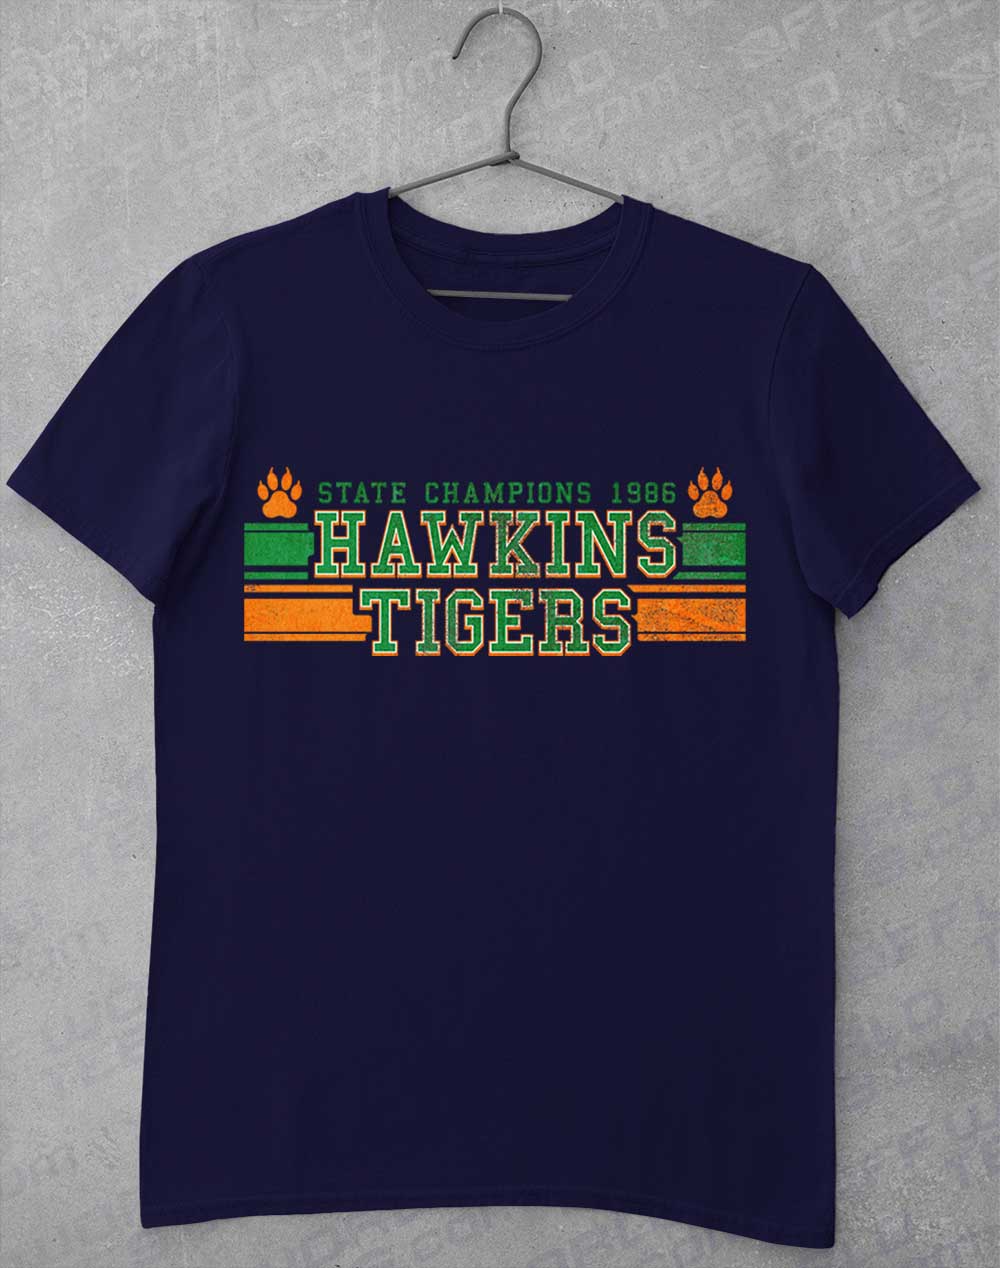 Navy - Hawkins Tigers State Champs 1986 T-Shirt